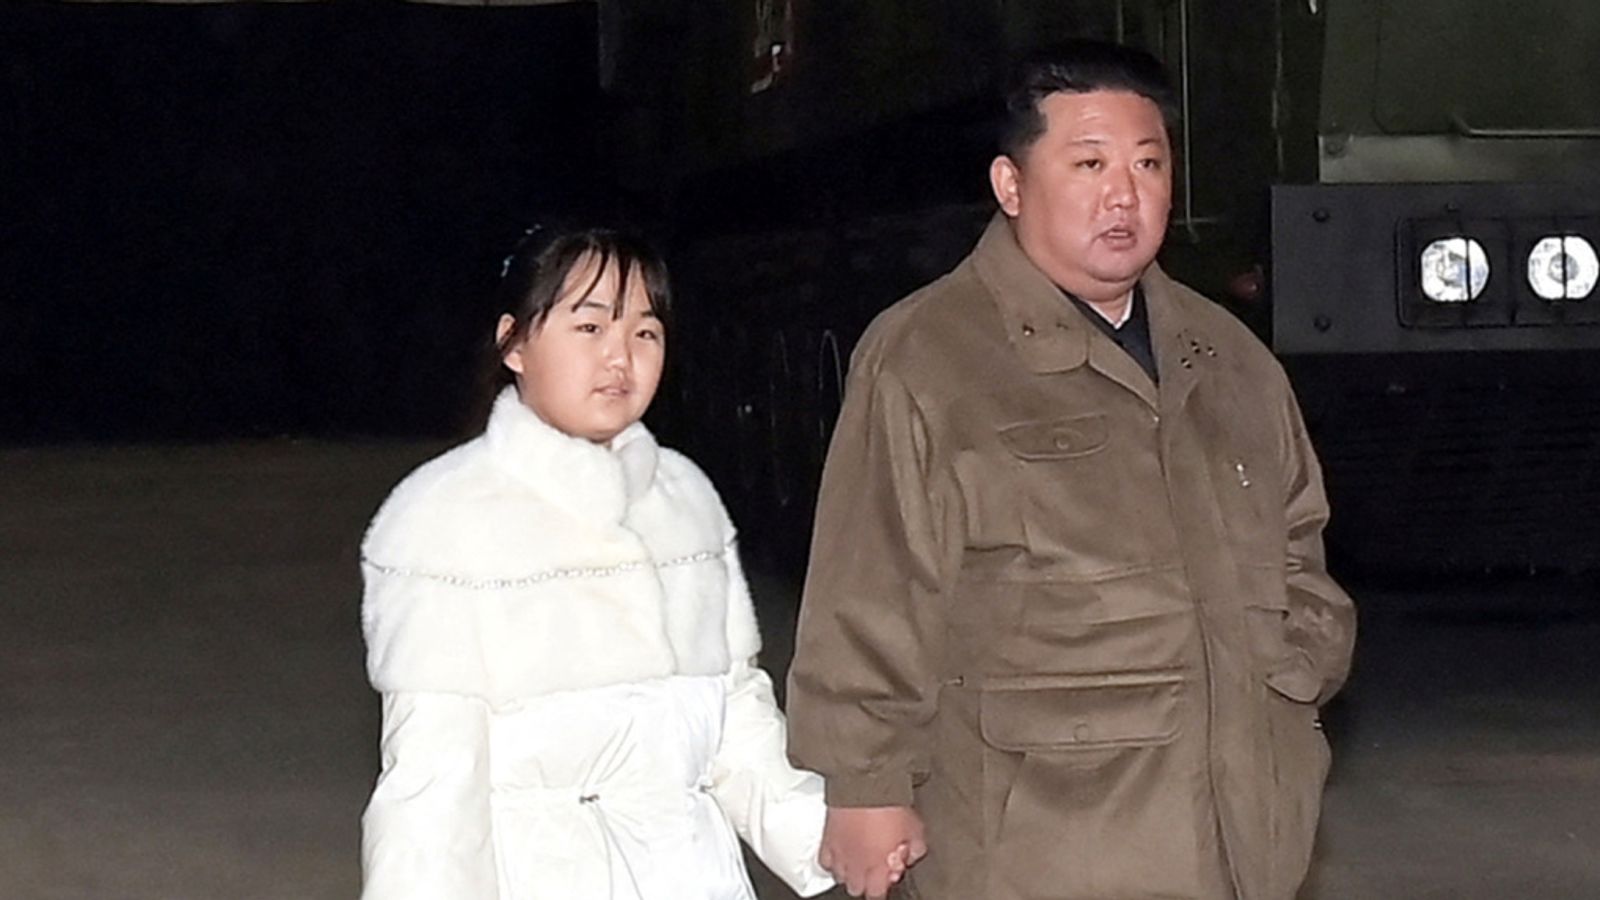 Kim Jong Un's daughter seen for first time in public at ballistic missile launch